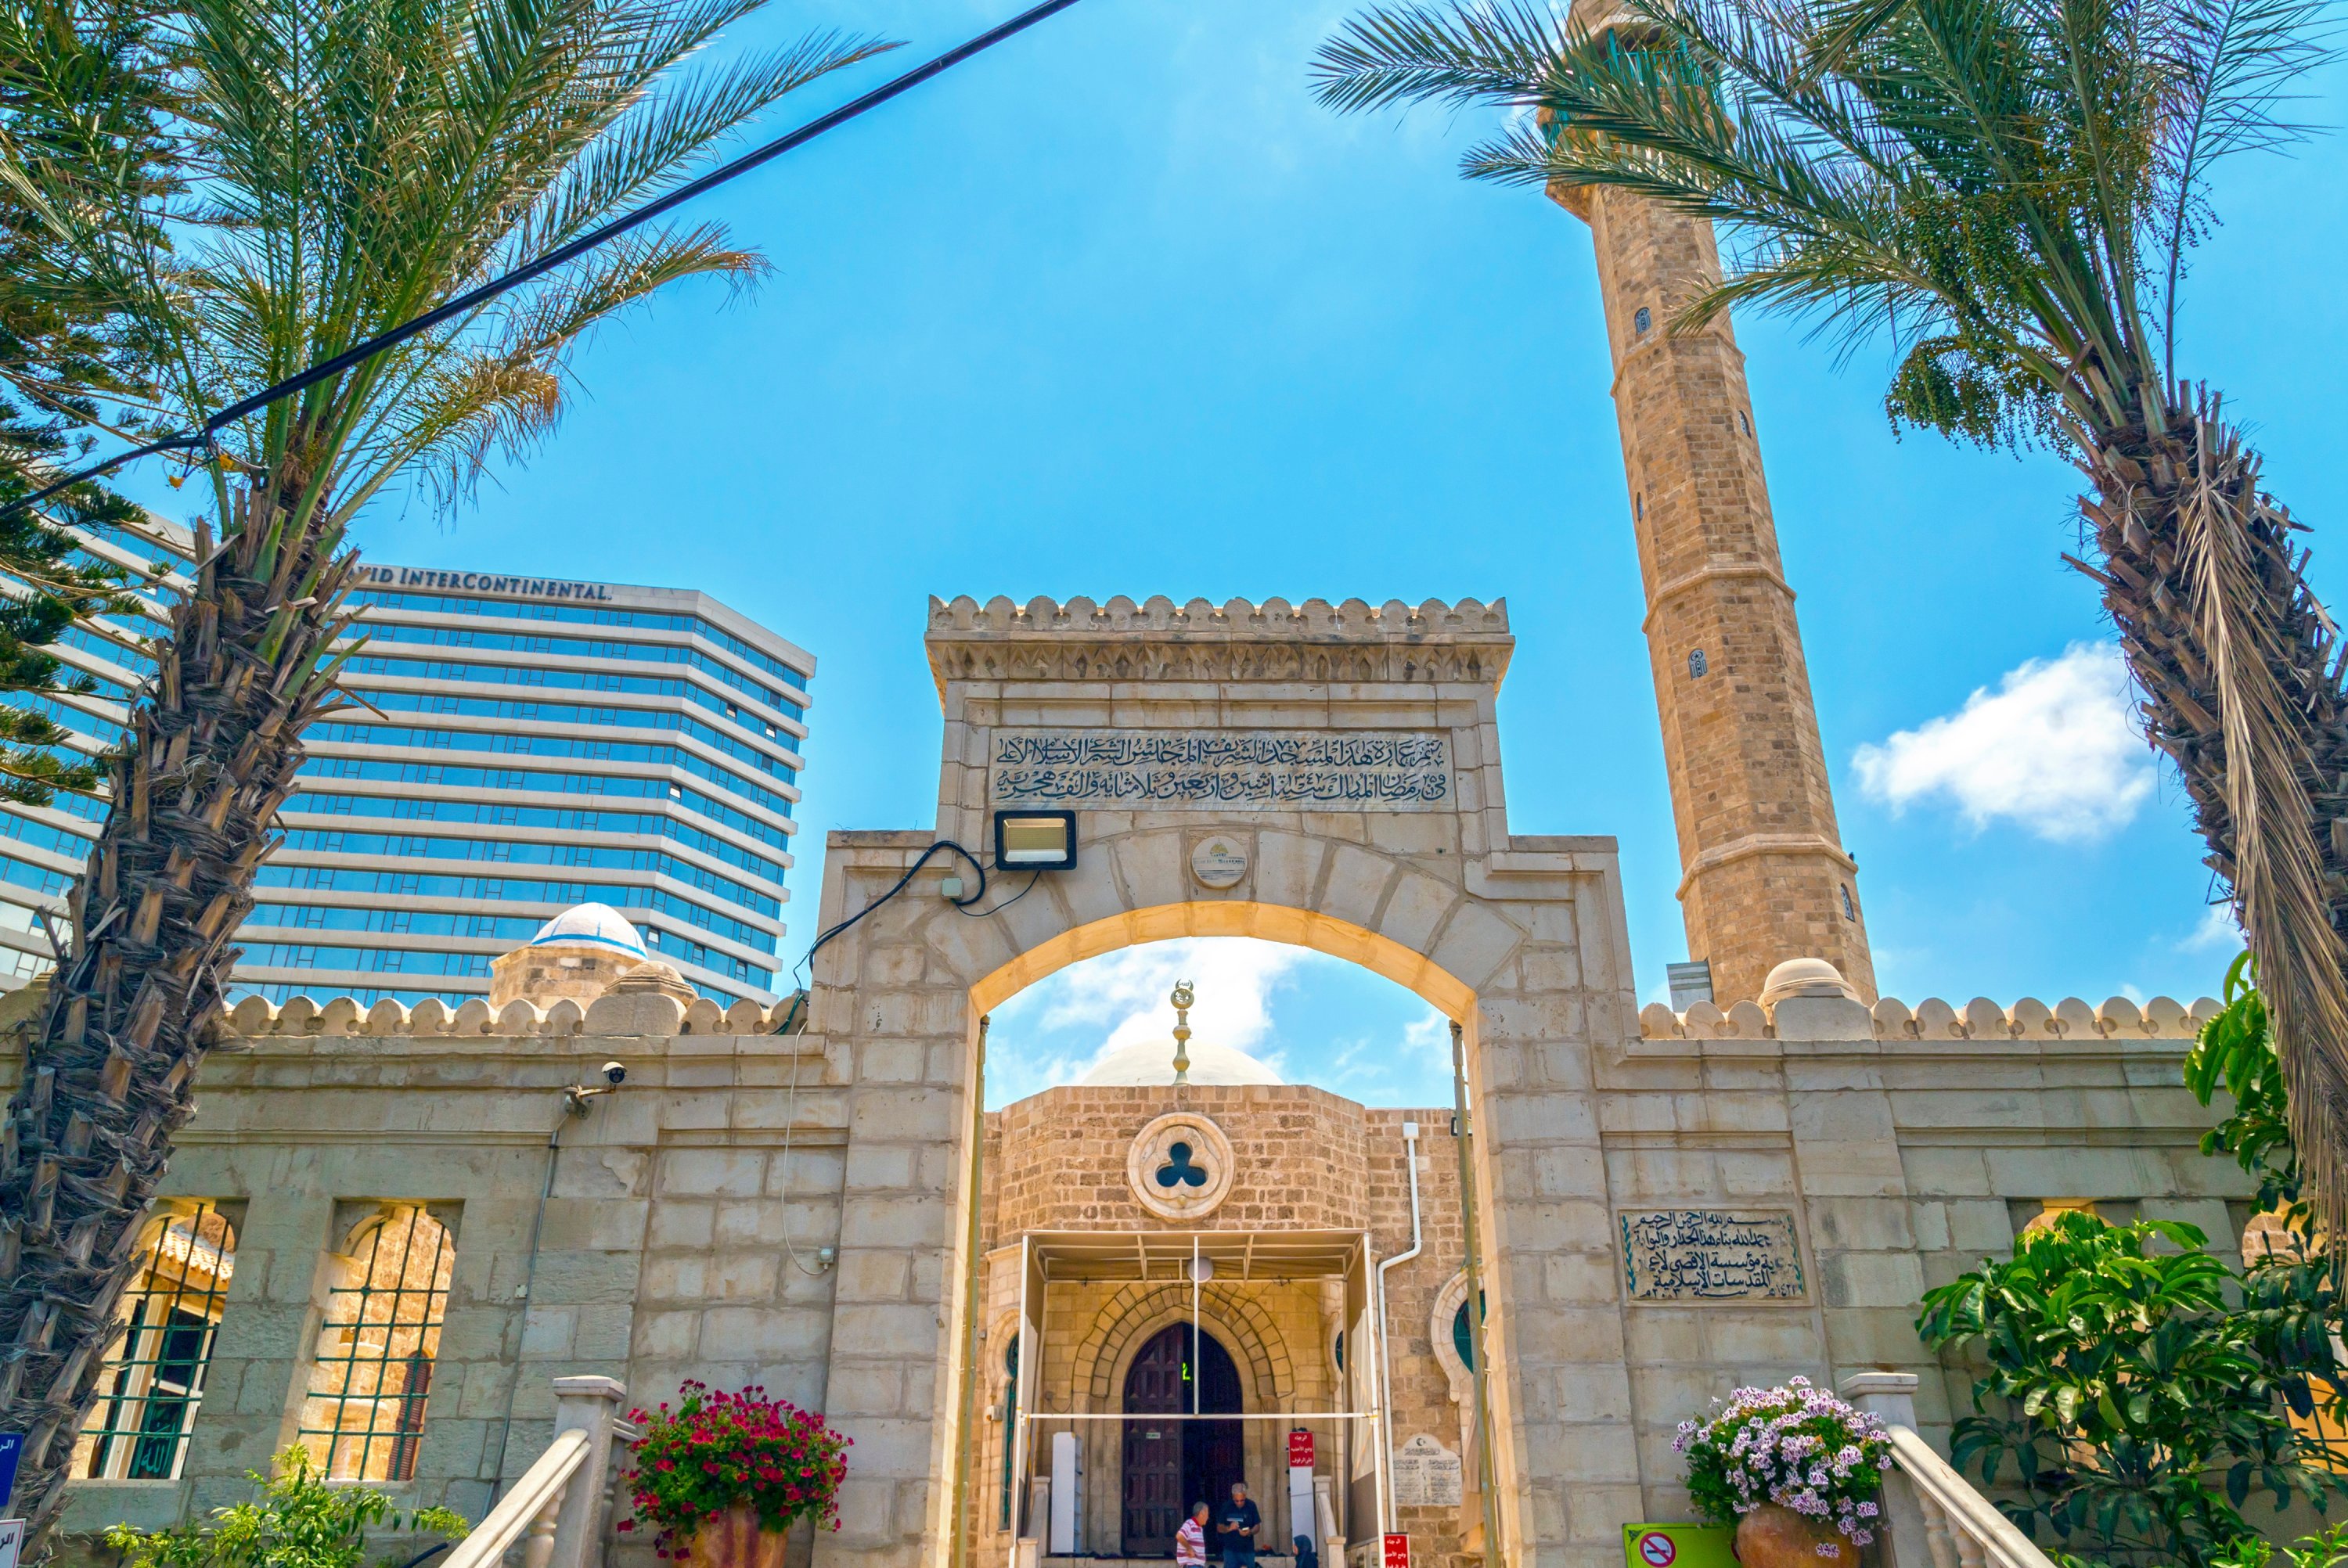 A view of the gate of the Hassan Bek Mosque, Tel Aviv, Israel, June 6, 2018. (Shutterstock Photo)